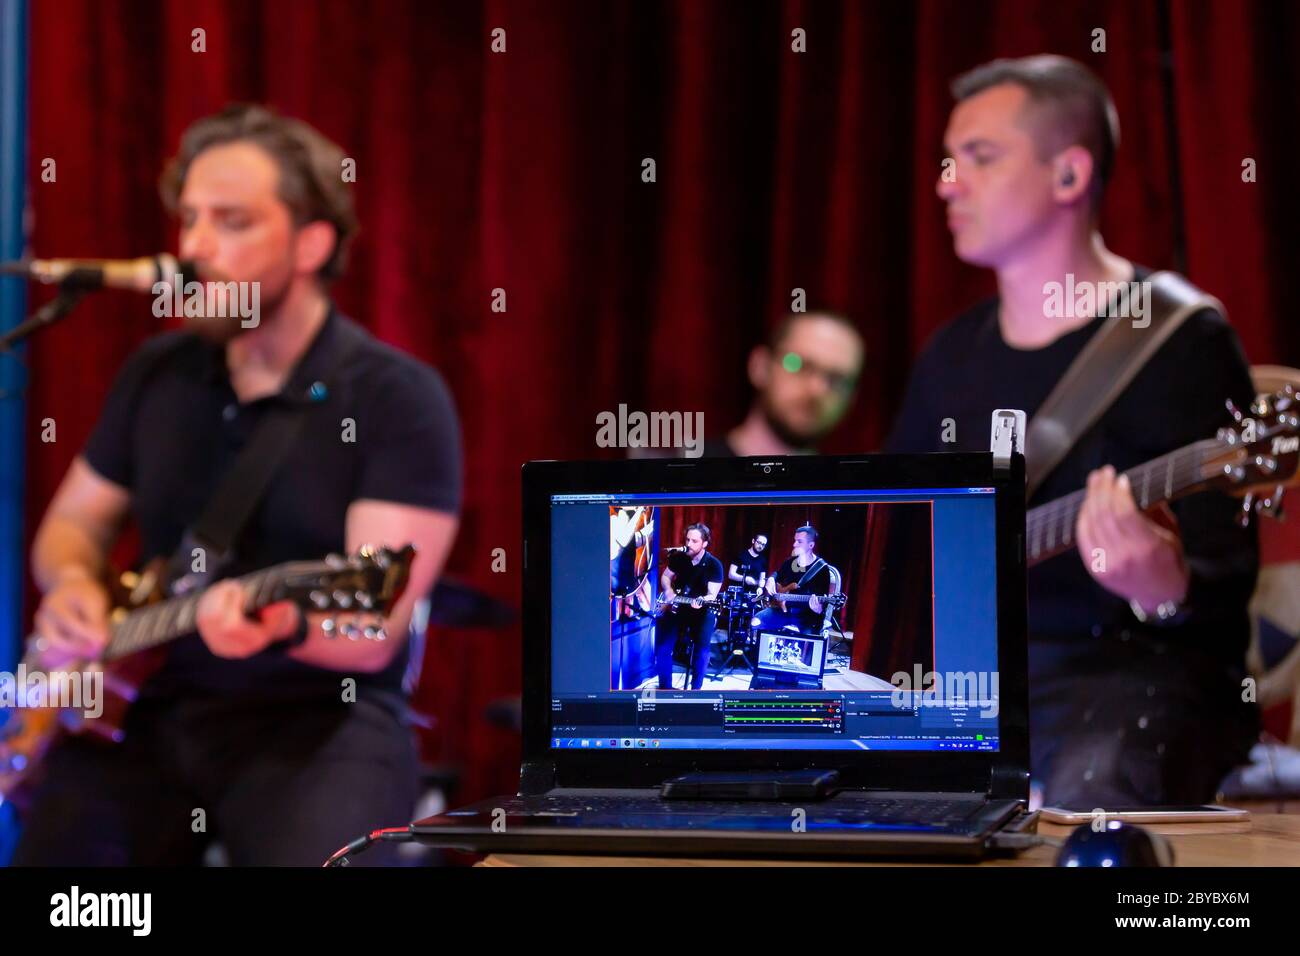 The Band of Musicians playing Electric Guitar, Bass Guitar and Drums during the Concert broadcast Online on Social media platforms in the Bar. Stock Photo